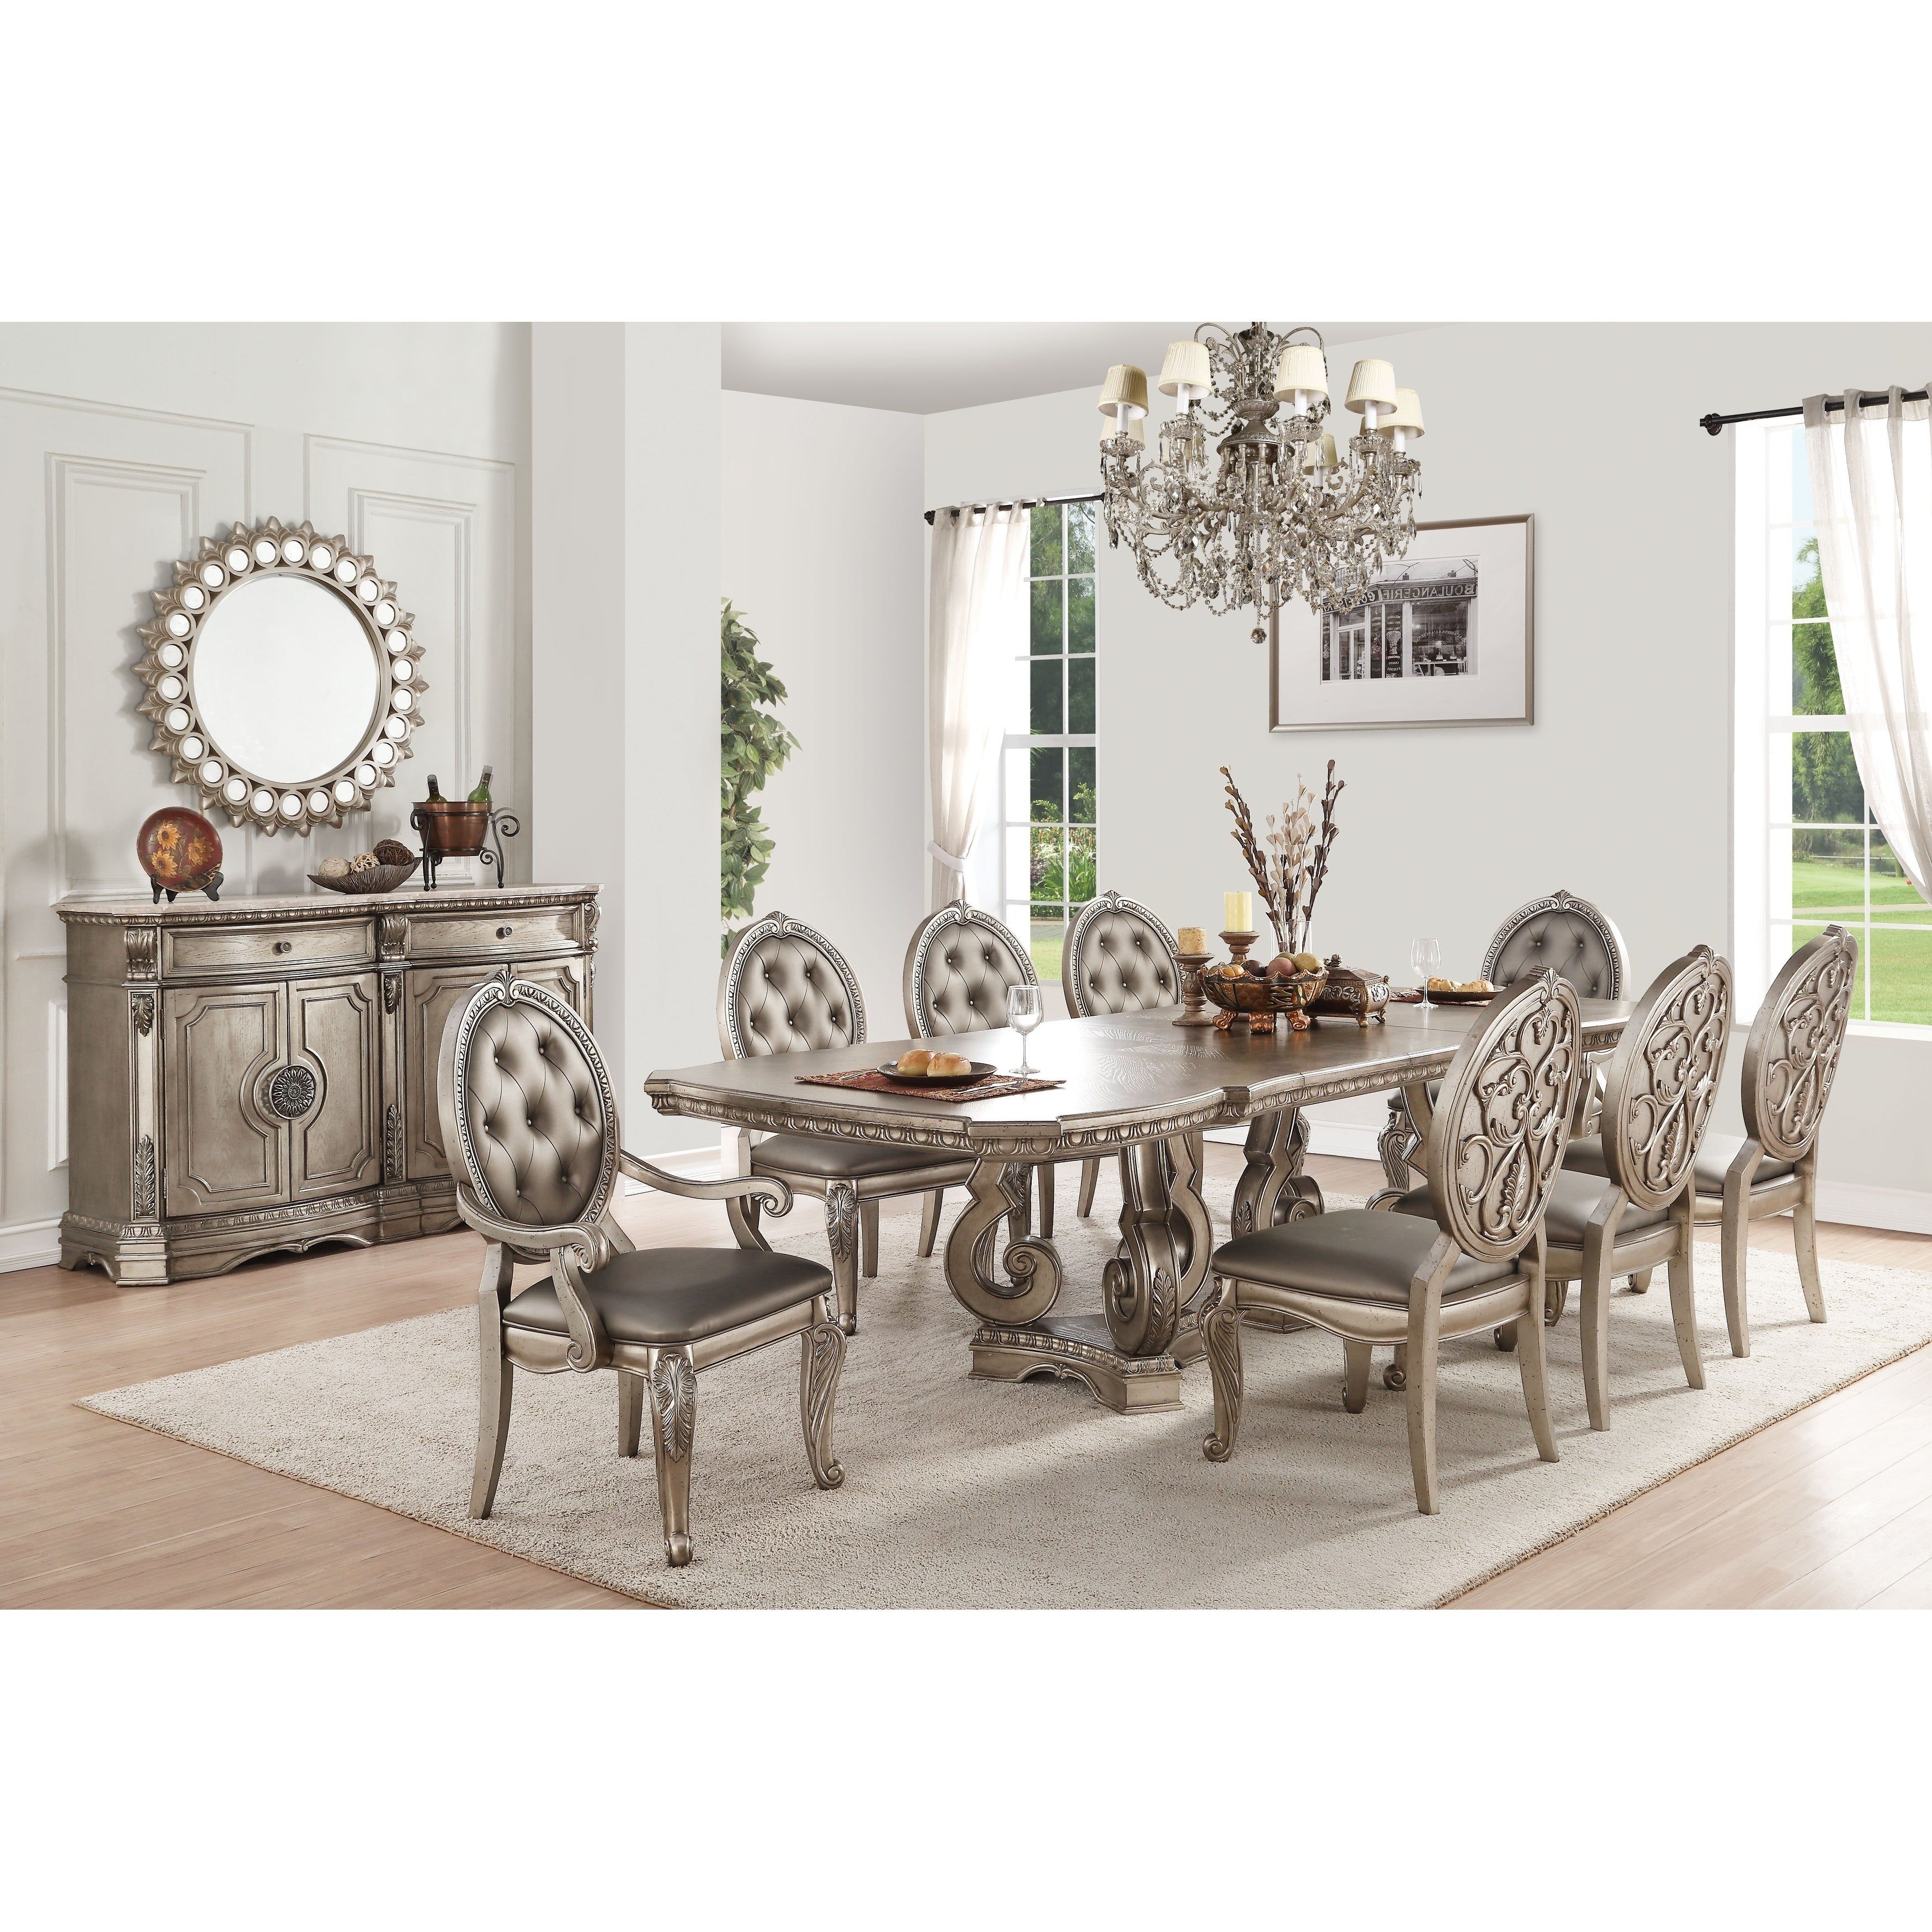 Acme Northville Dining Table In Antique Champagne In Newest Chelmsford 3 Piece Dining Sets (View 6 of 20)